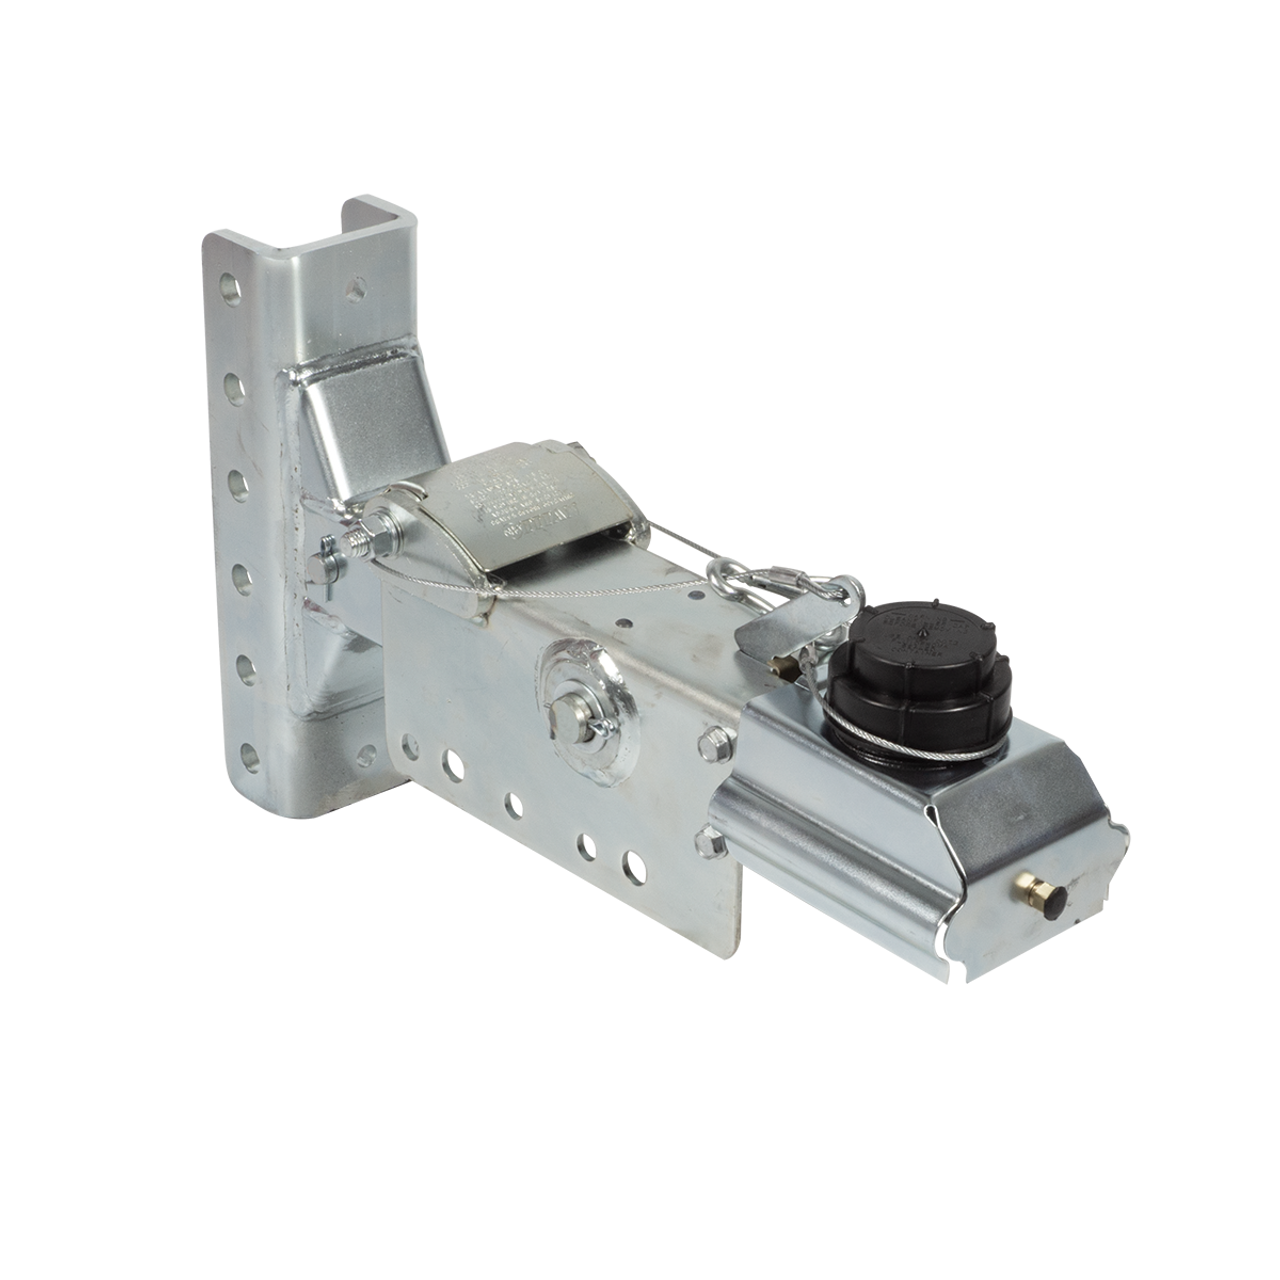 68-335 --- Hydraulic Brake Actuator with 6 hole Channel - 8,000 lb Capacity - Model DX86